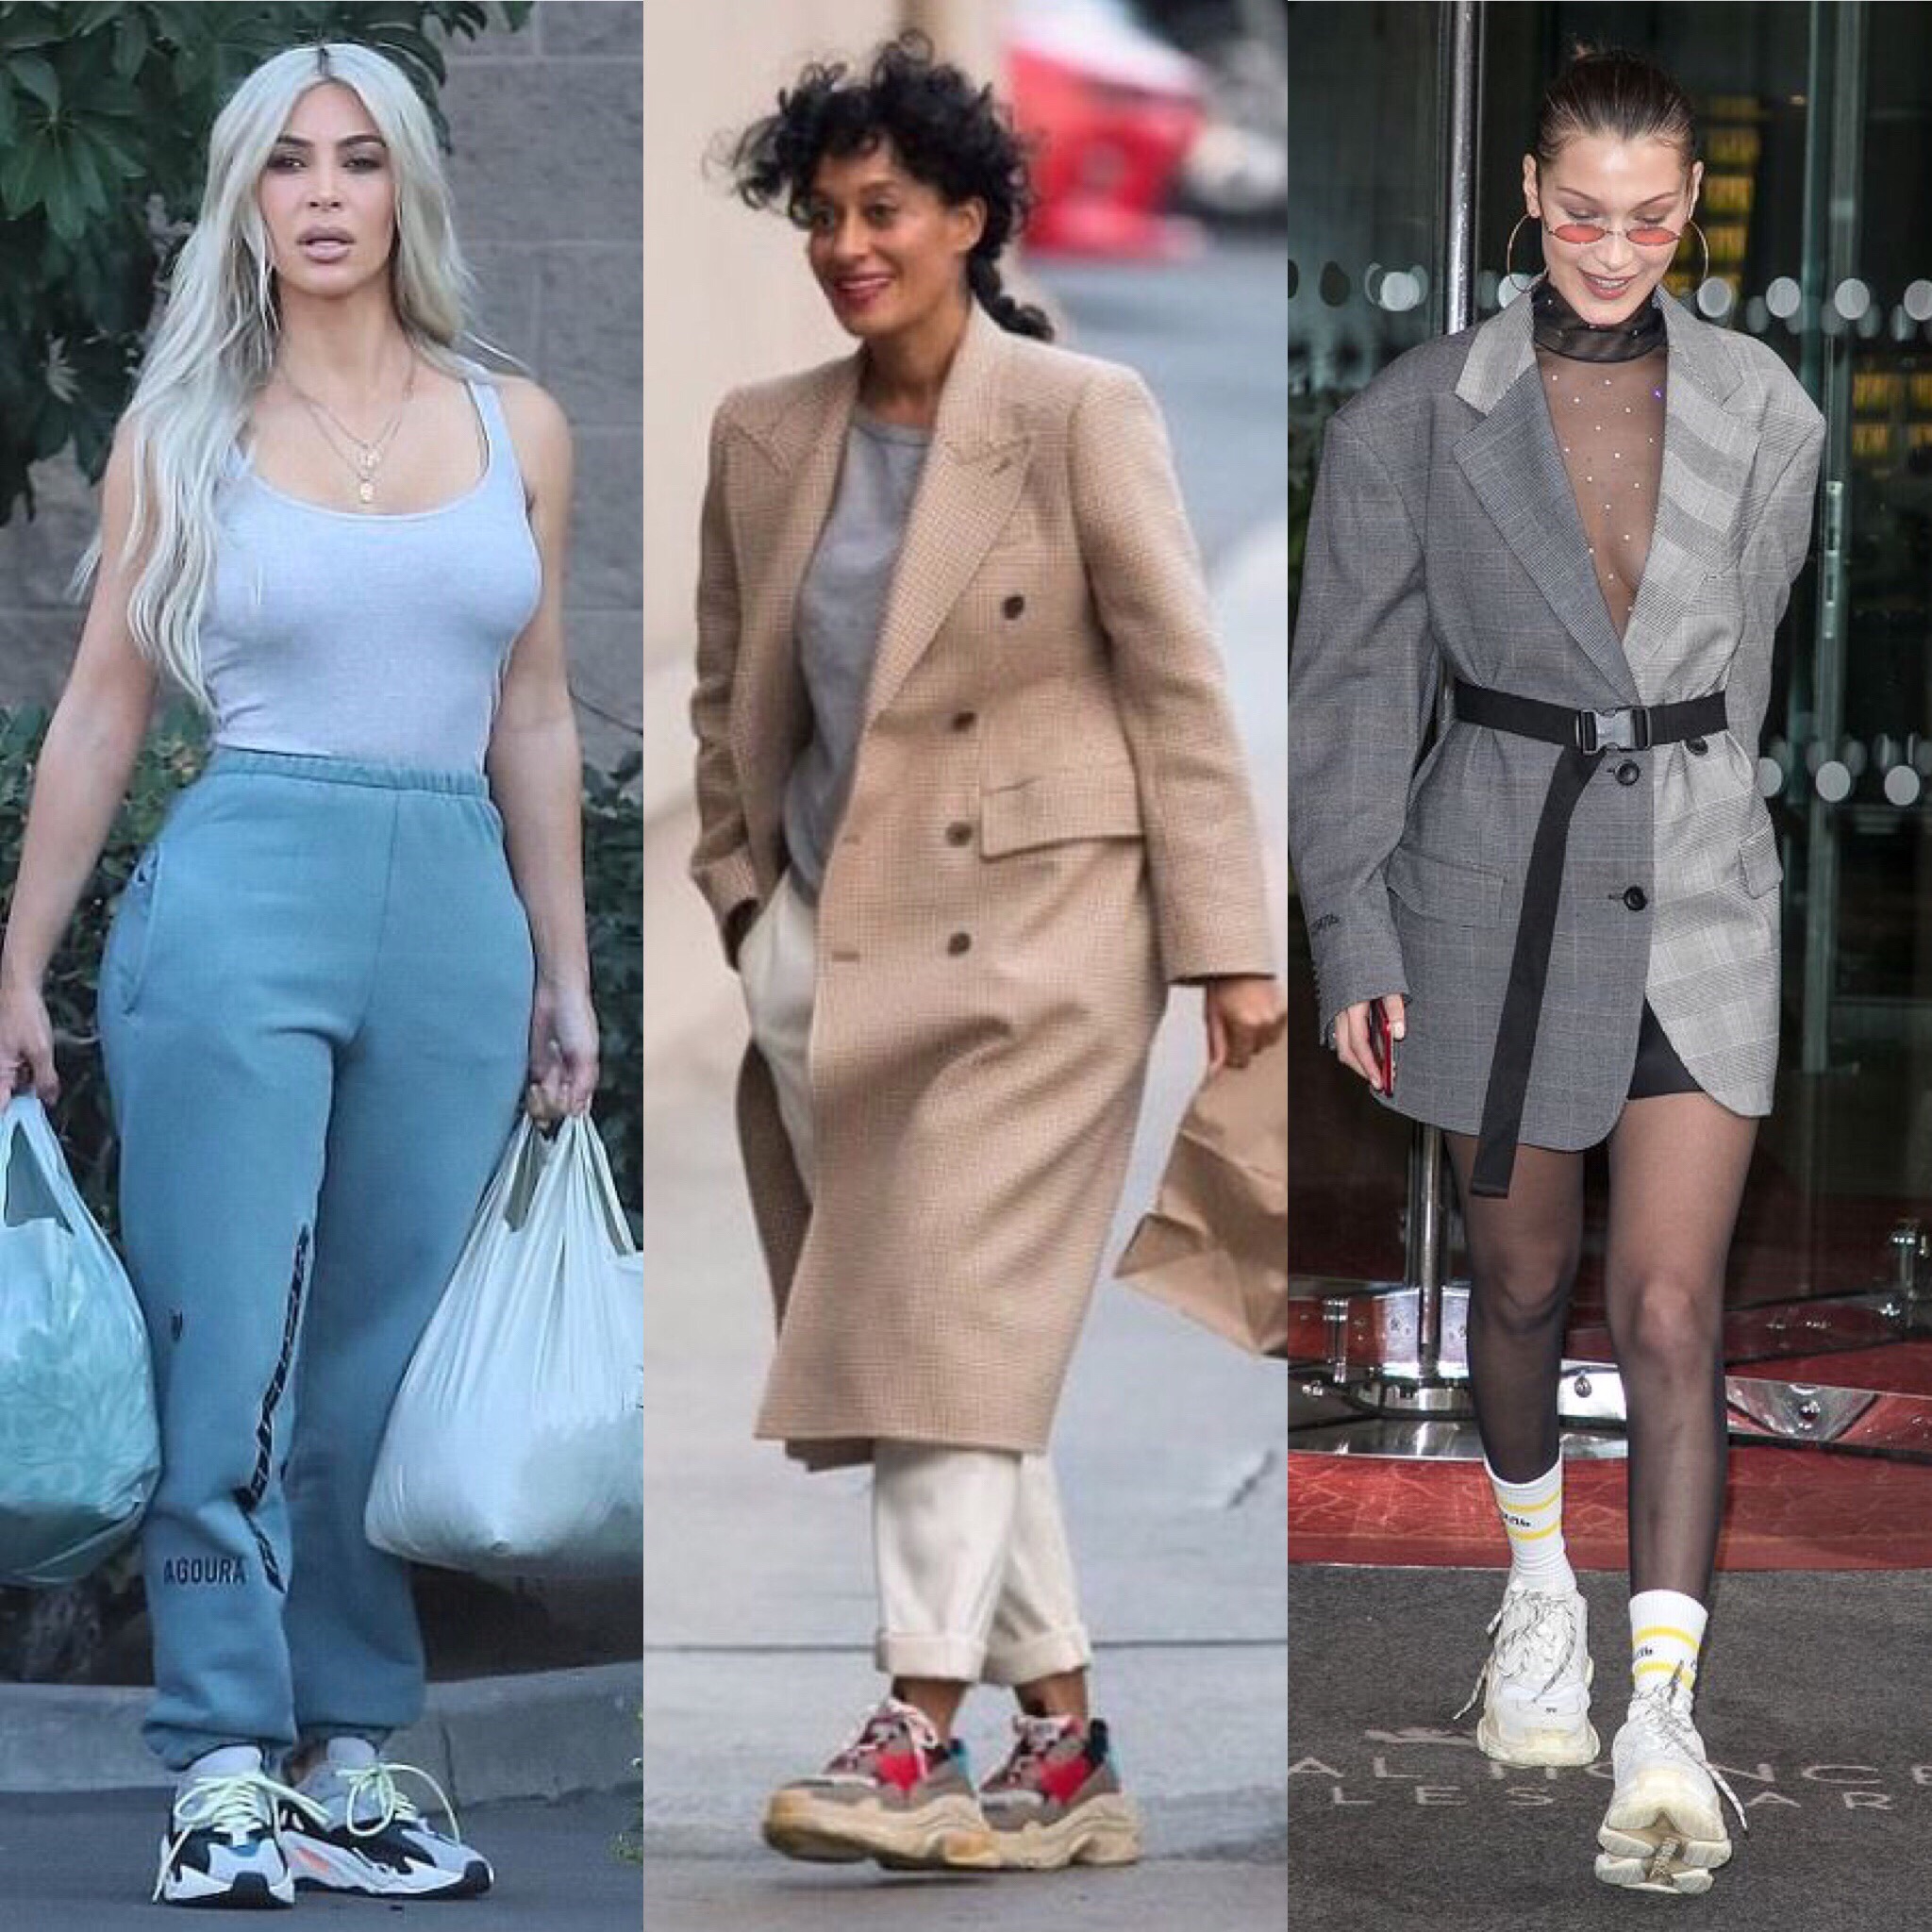 UGLY” SNEAKER TREND – as told by 